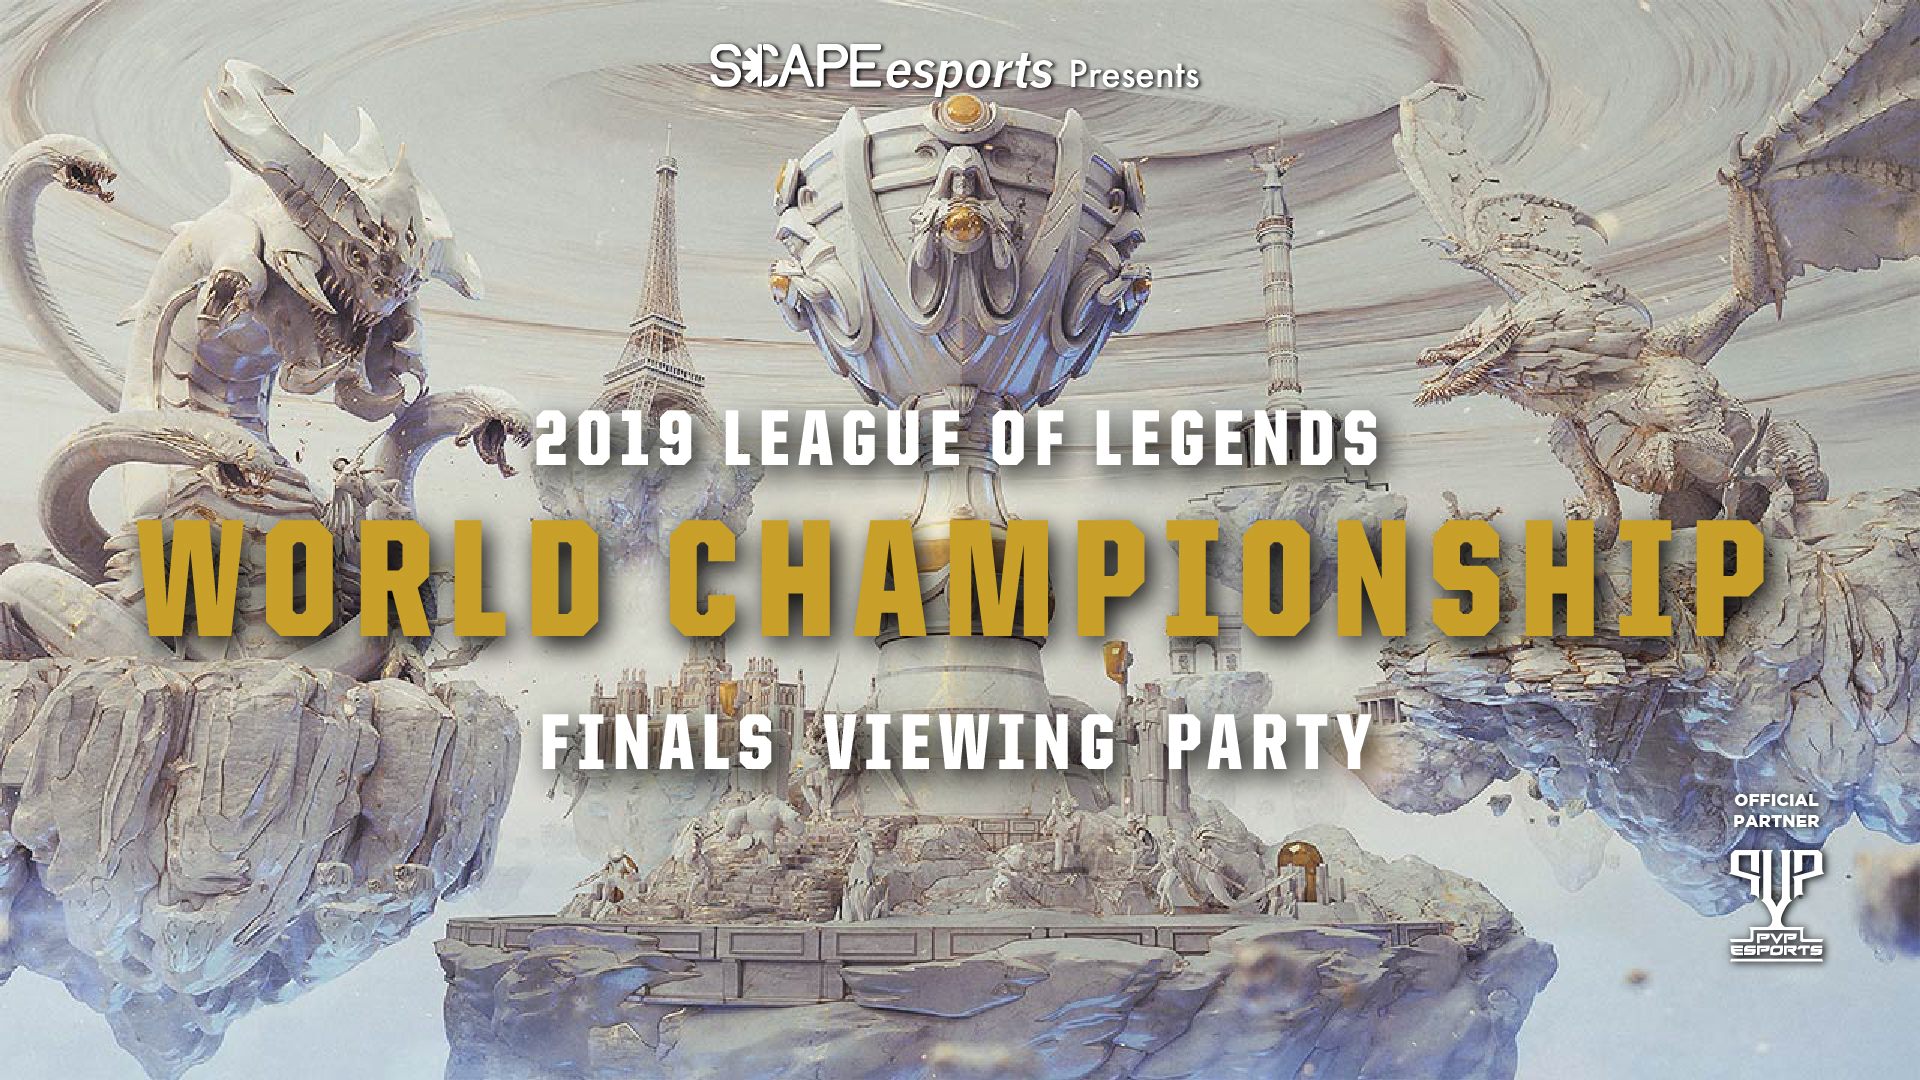 Ticket information for the 2019 League of Legends World